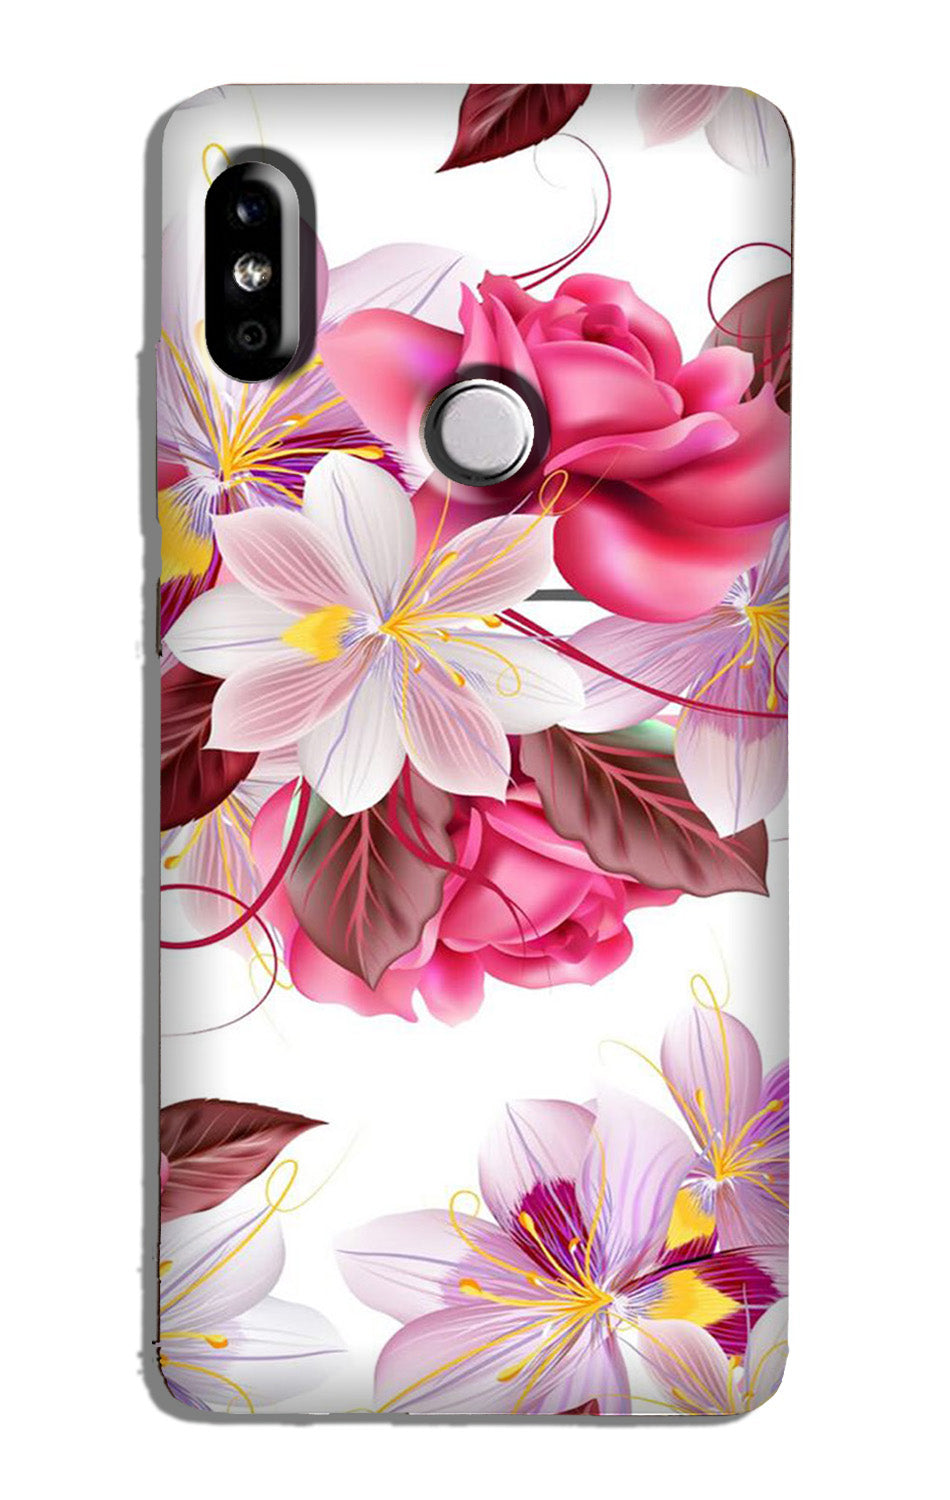 Beautiful flowers Case for Redmi 6 Pro